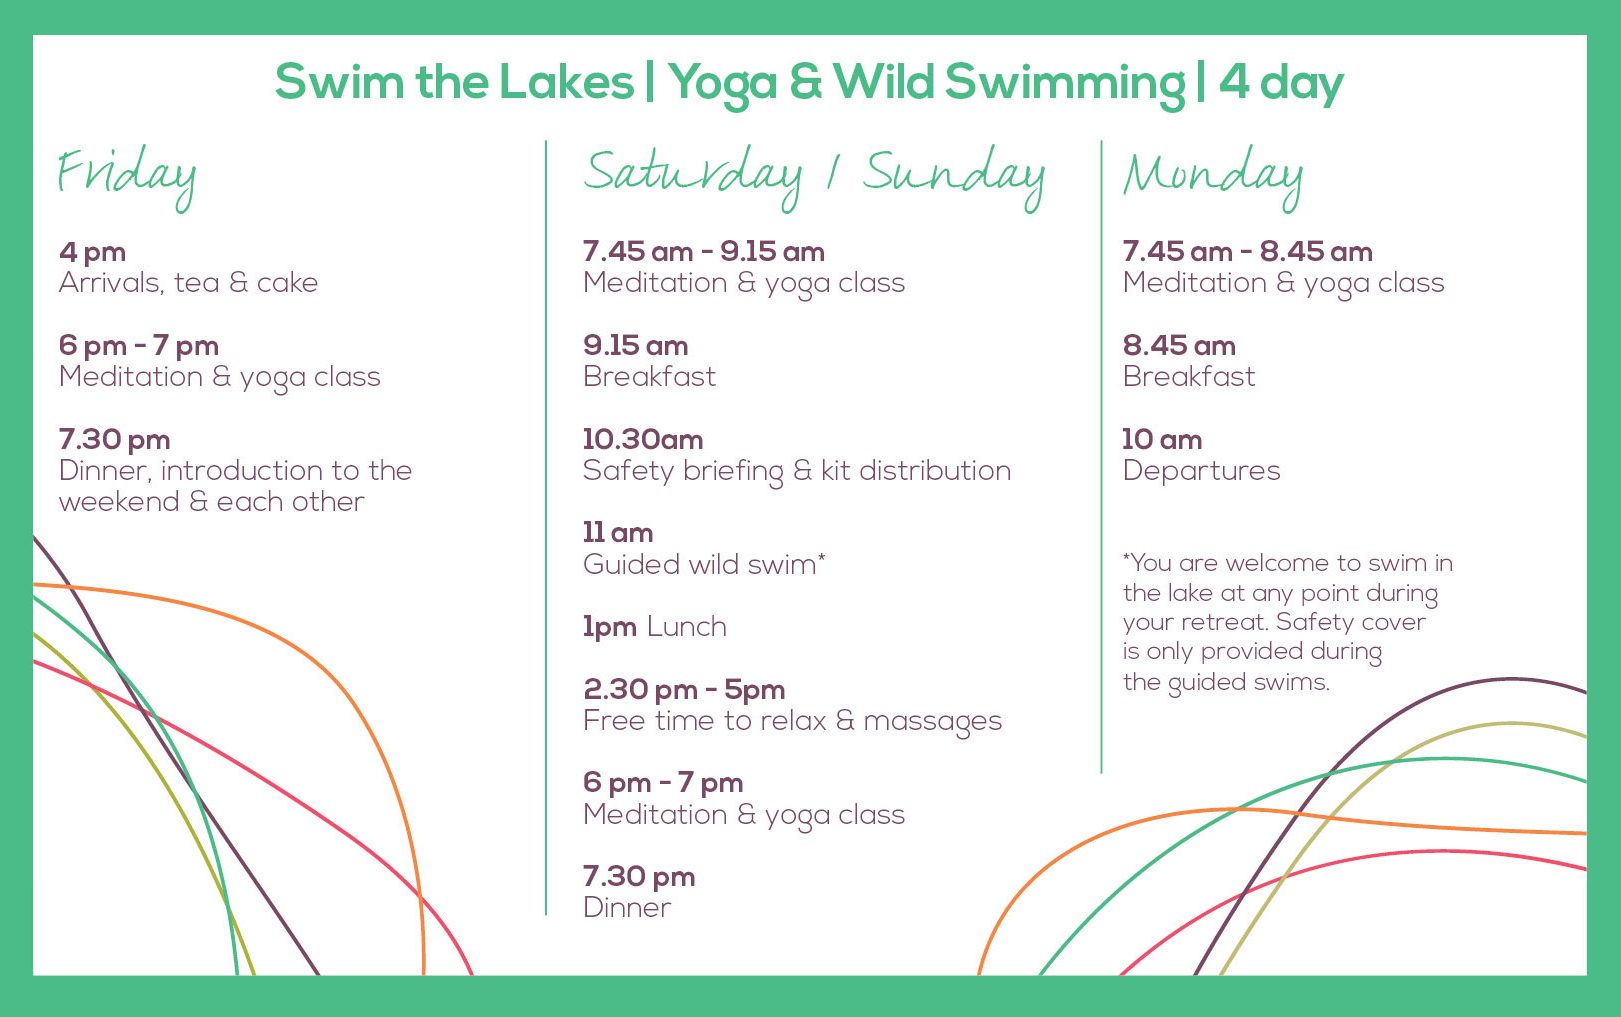 itinerary for Swim the Lakes 5 day retreat